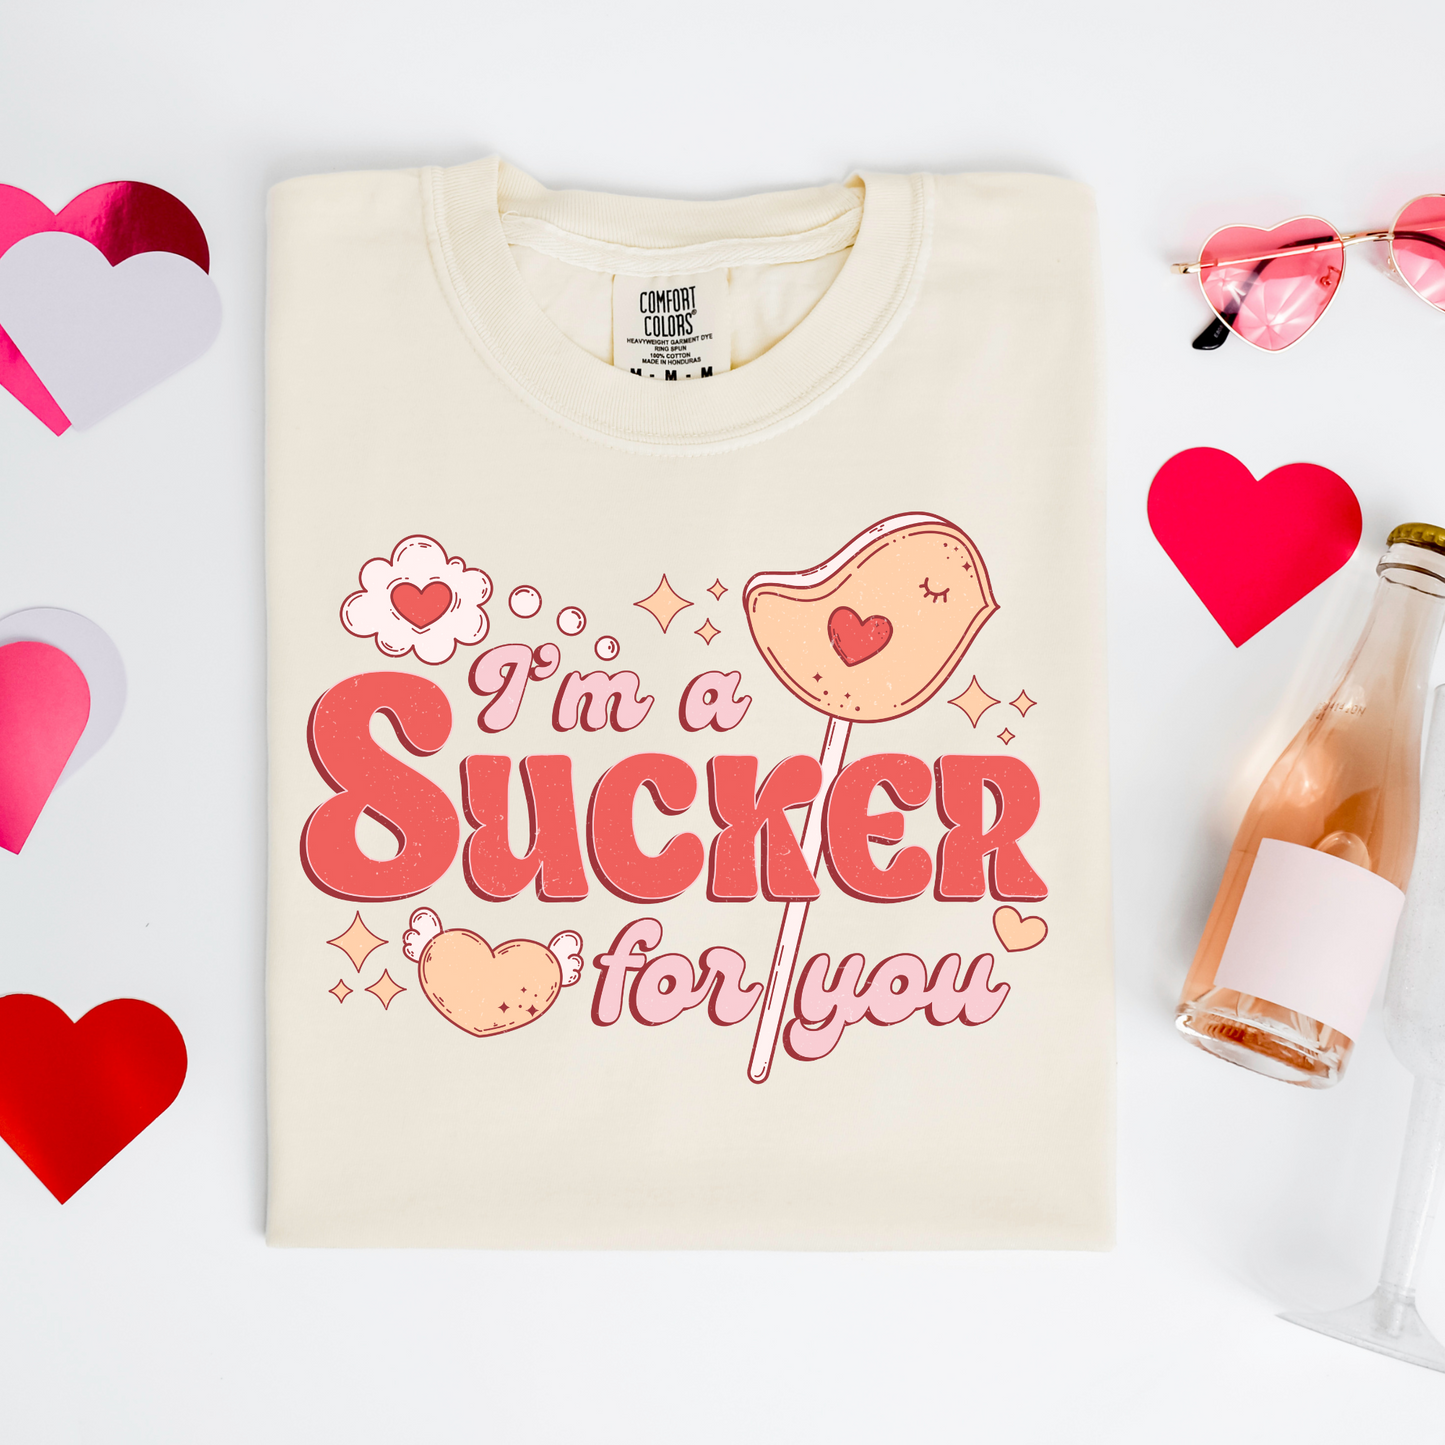 a t - shirt that says i'm a sucker for you